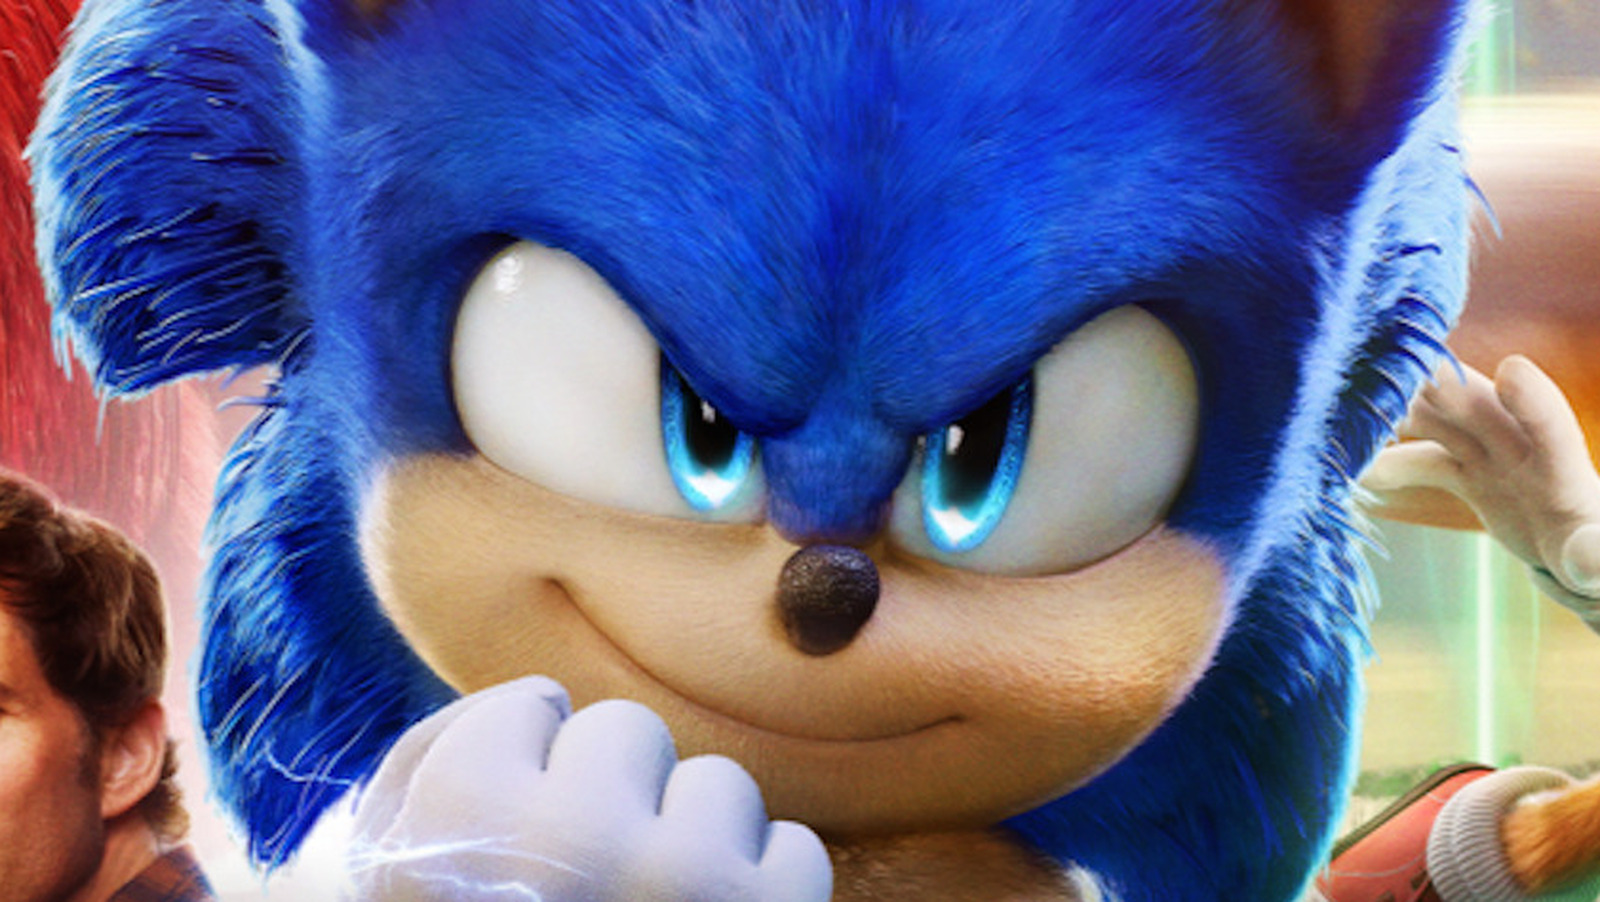 A Good Sonic the Hedgehog Movie? Not So Fast